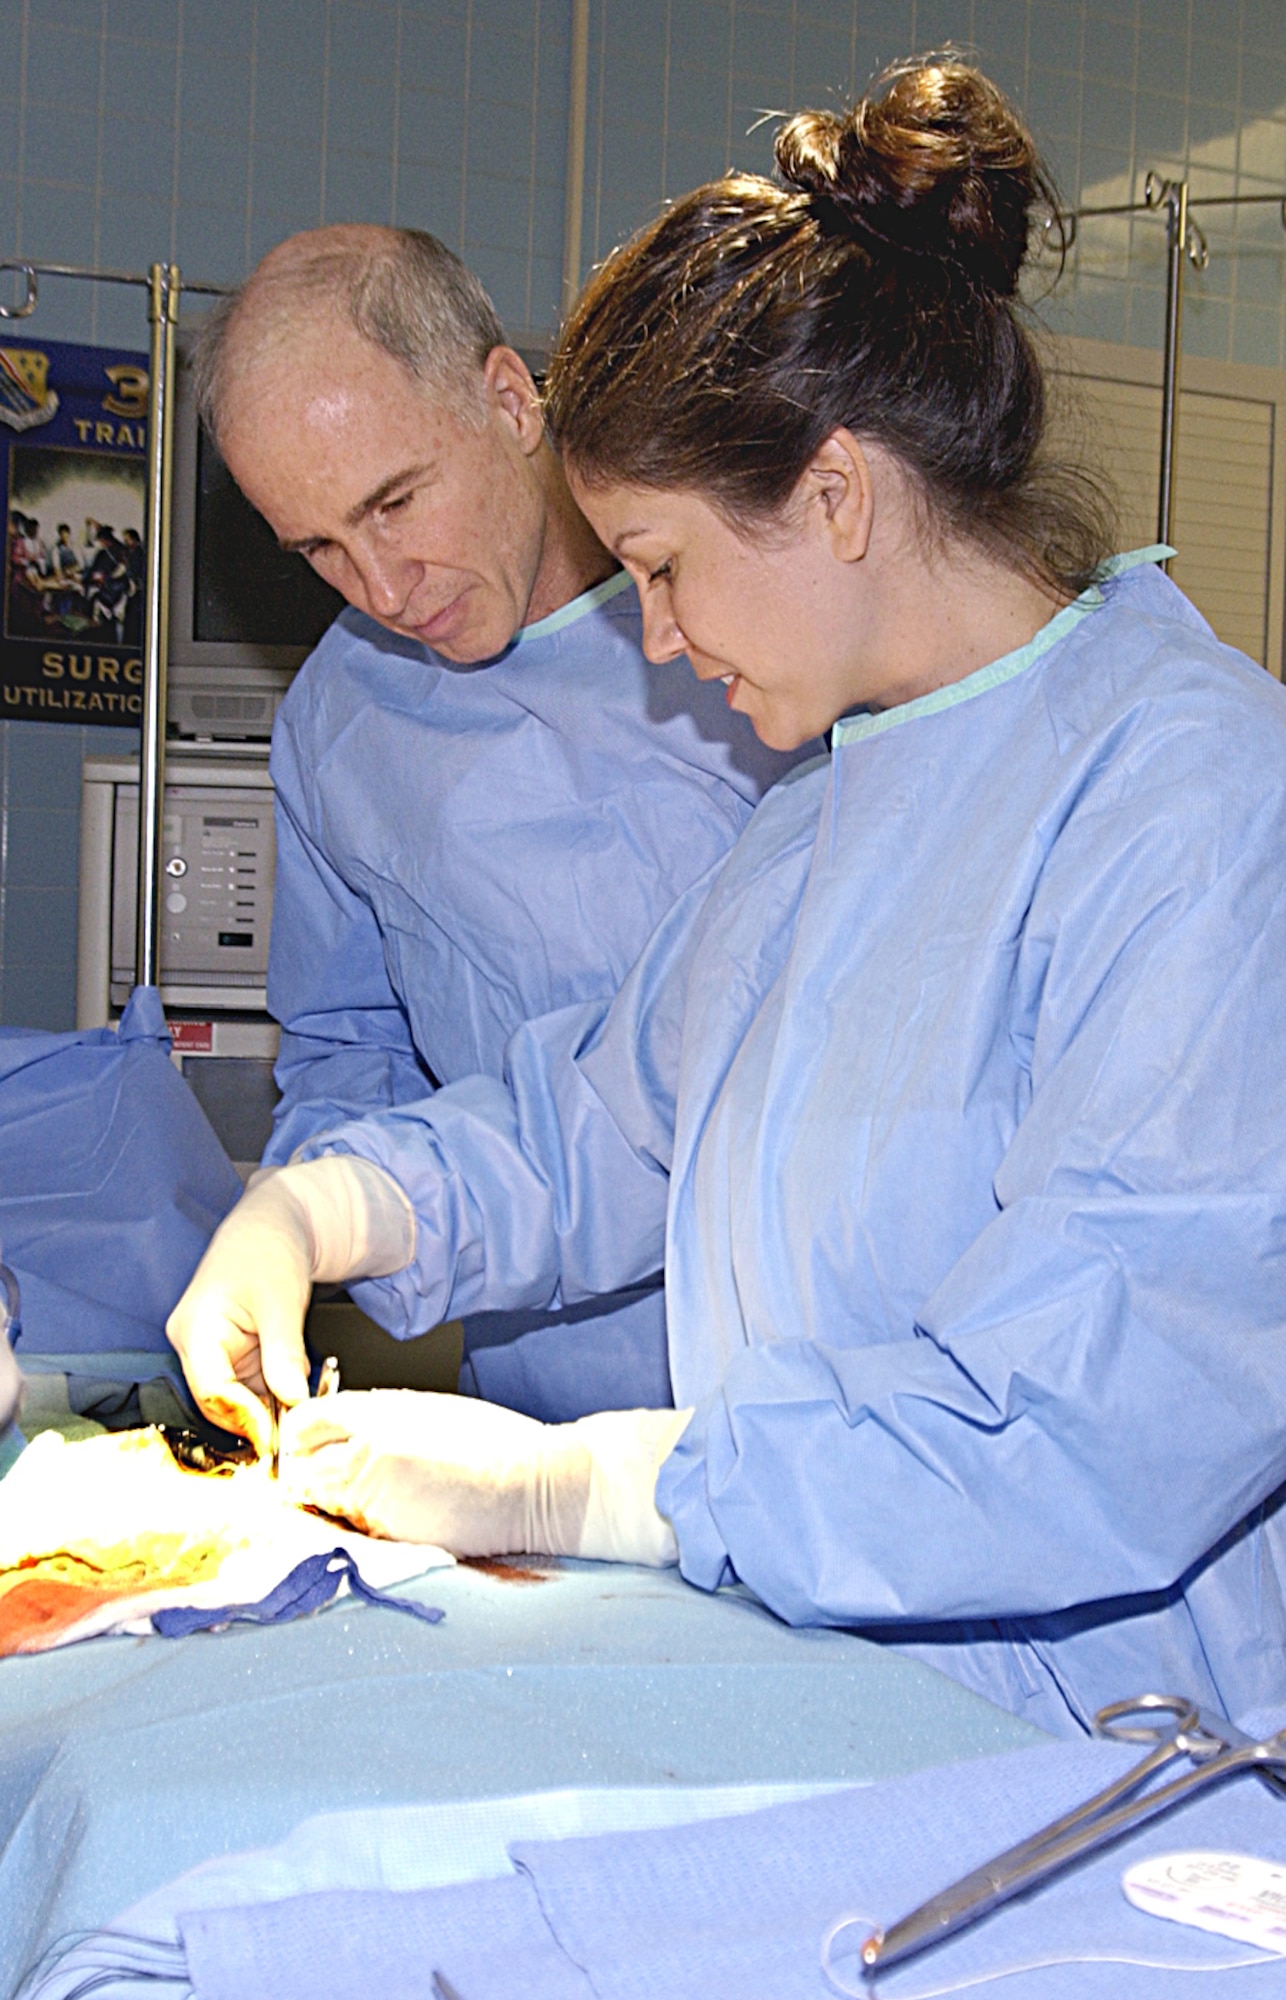 Tech. Sgt. Dolores Lerschen, an instructor supervisor at the 383rd Training Squadron's Surgical Services Apprentice Course, helps Brig. Gen. Richard Devereaux during an "appendectomy" Sept. 14. (U.S. Air Force photo/Harry Tonemah)